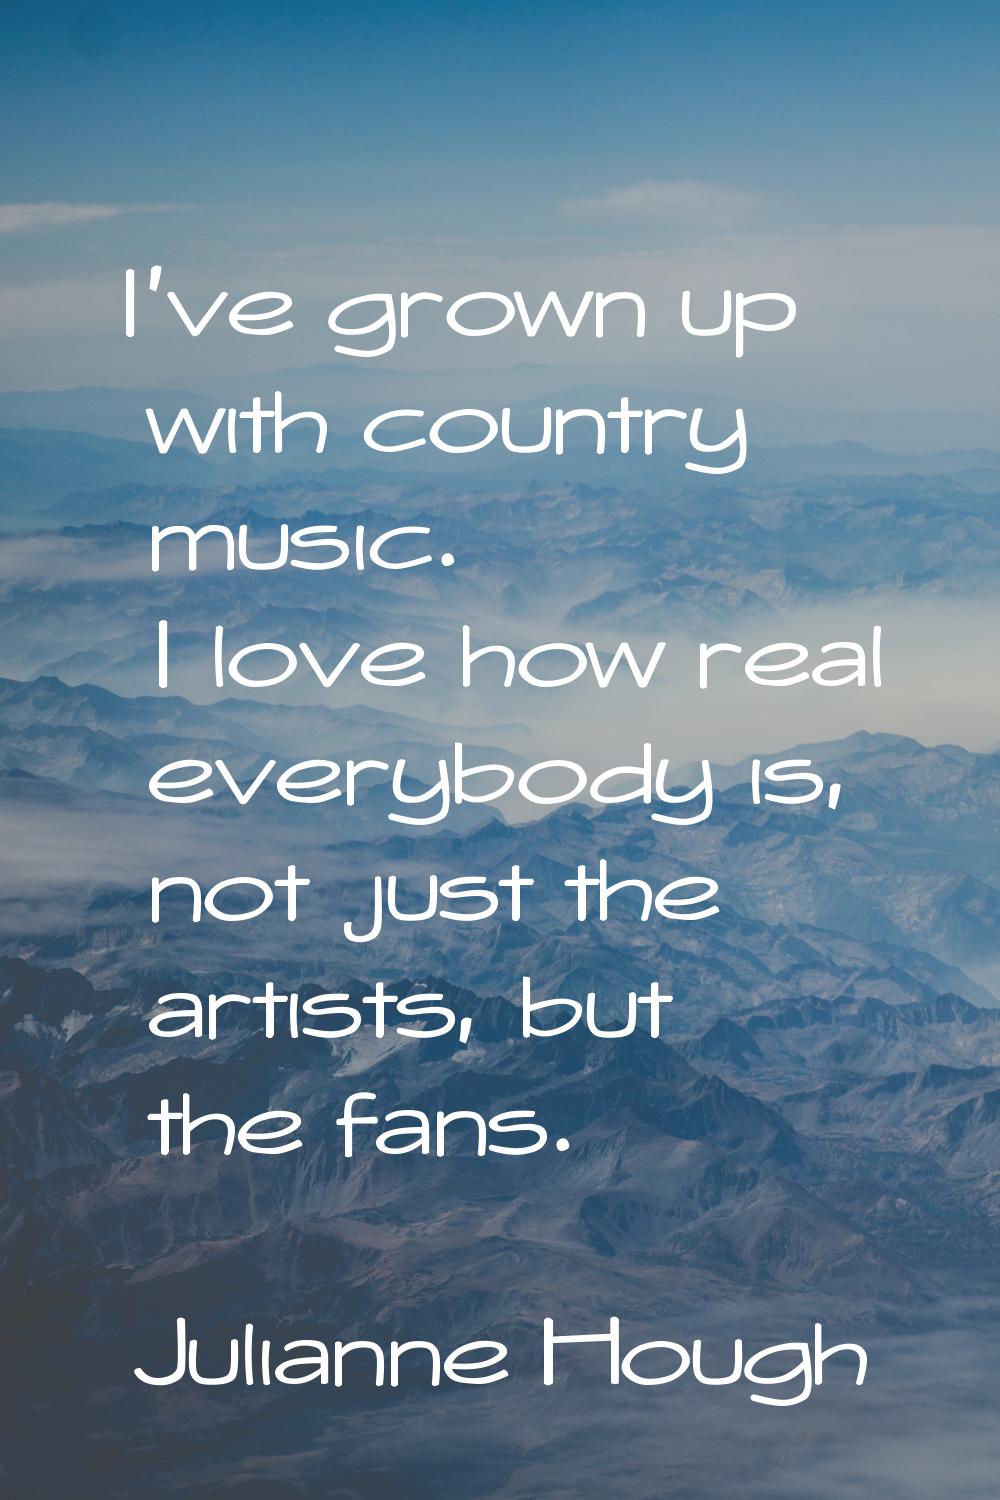 I've grown up with country music. I love how real everybody is, not just the artists, but the fans.